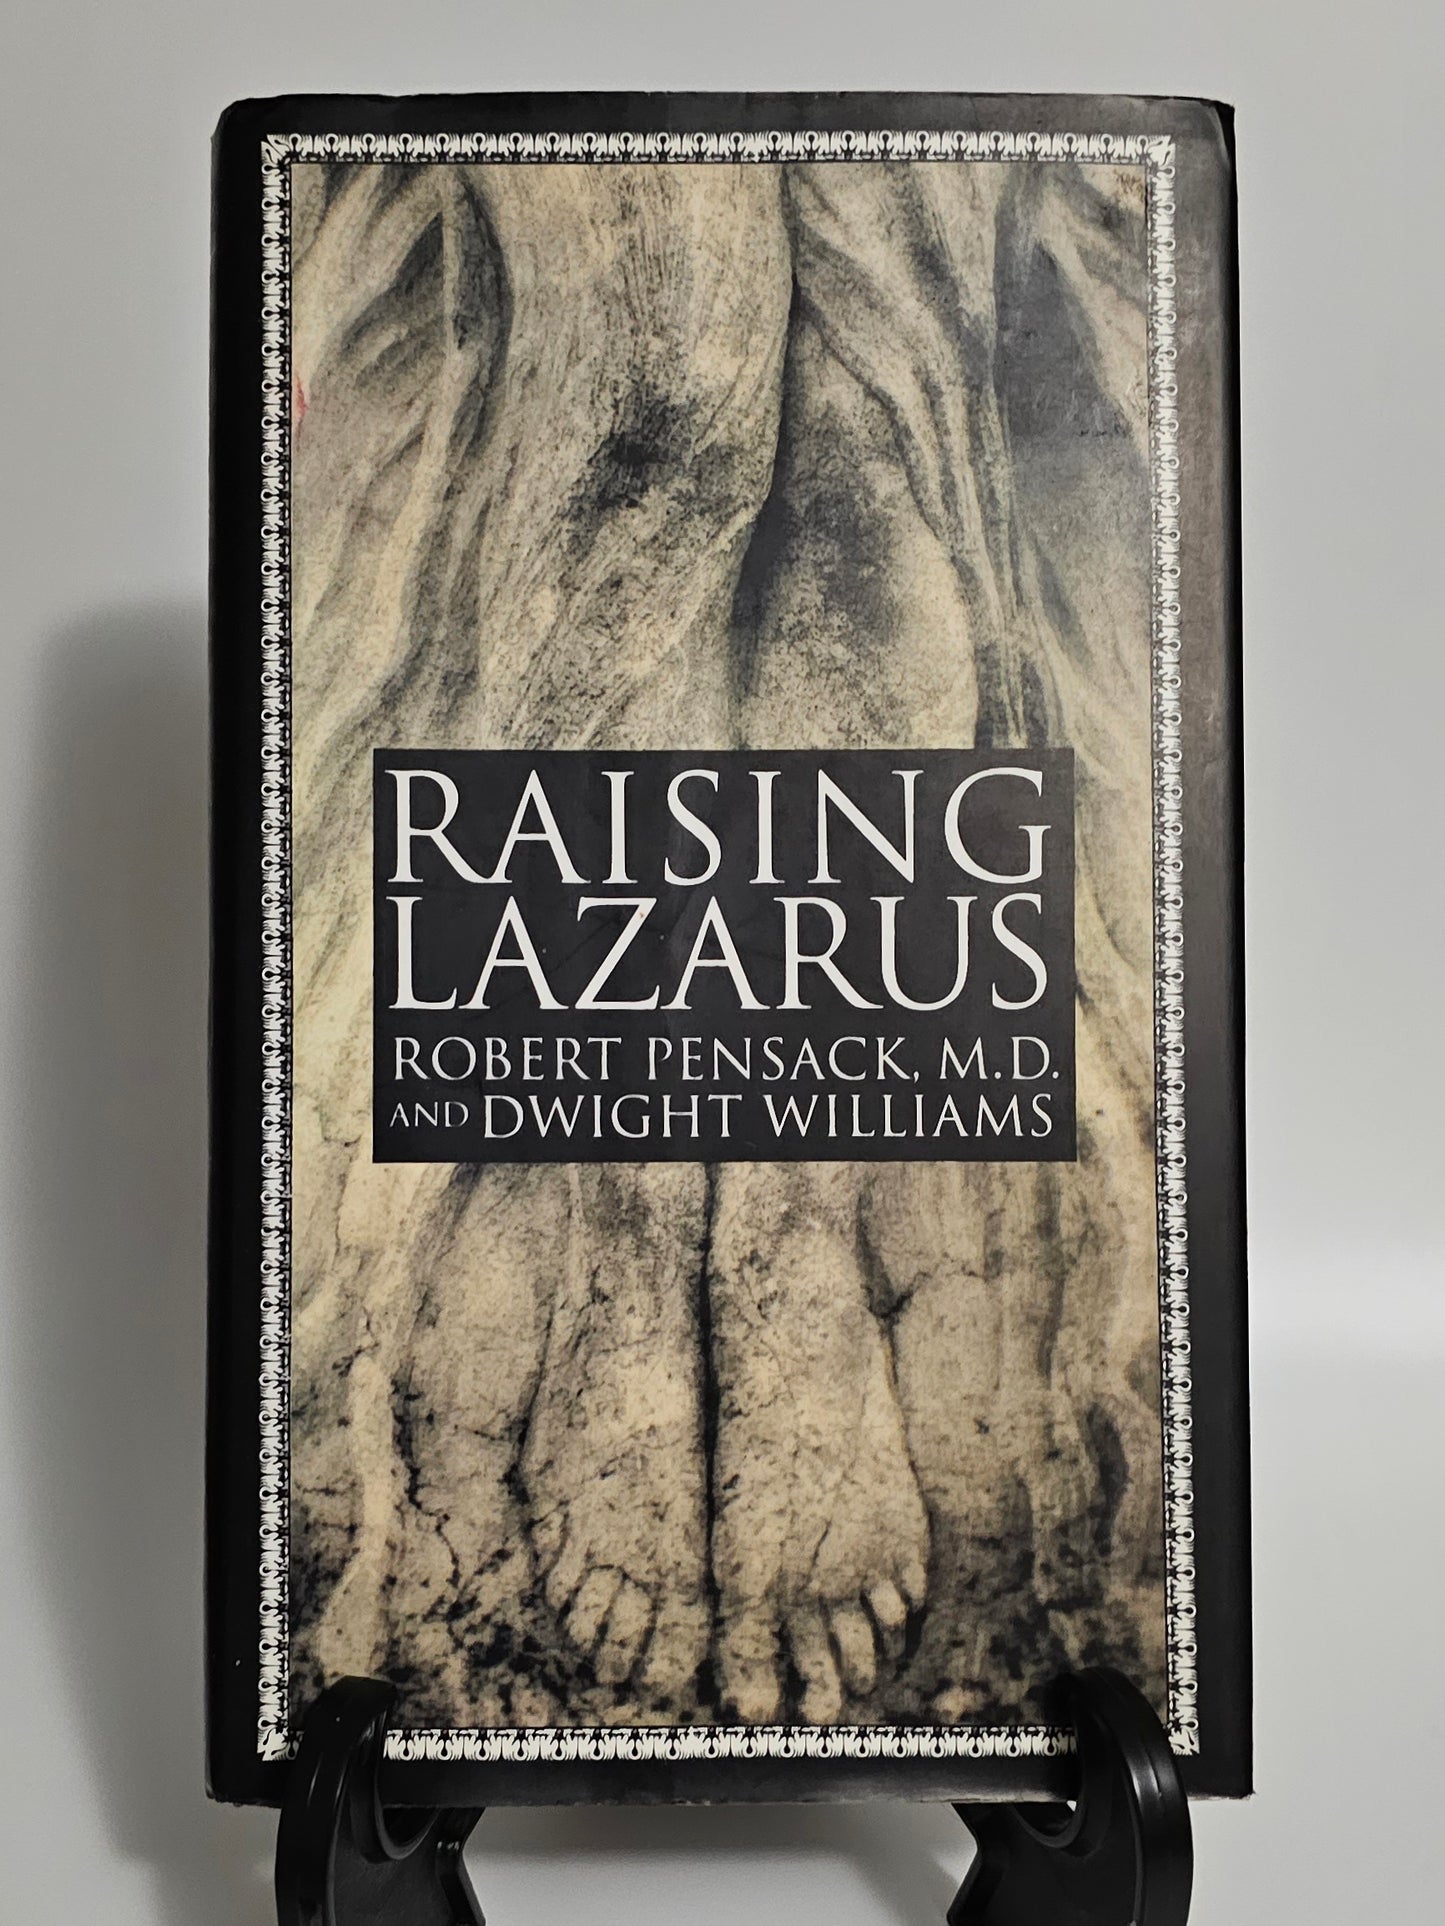 Raising Lazarus by Robert Pensack and Dwight Williams